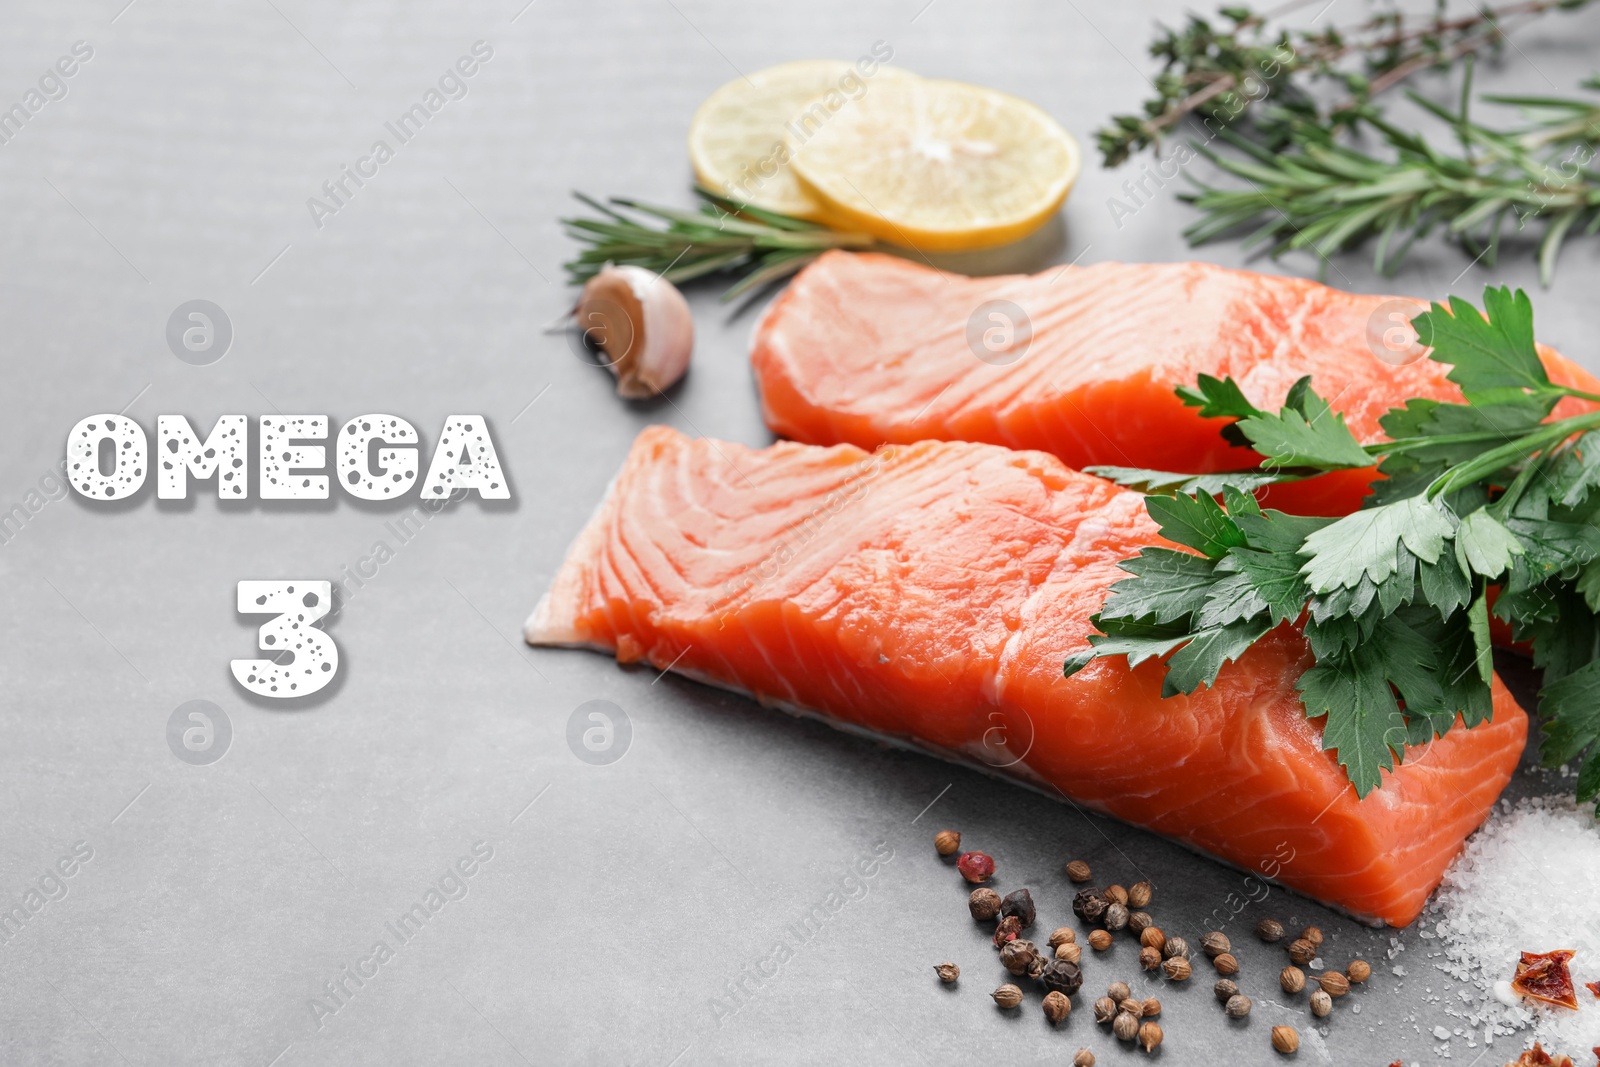 Image of Omega 3. Fresh cut salmon, herbs and spices on grey table, closeup